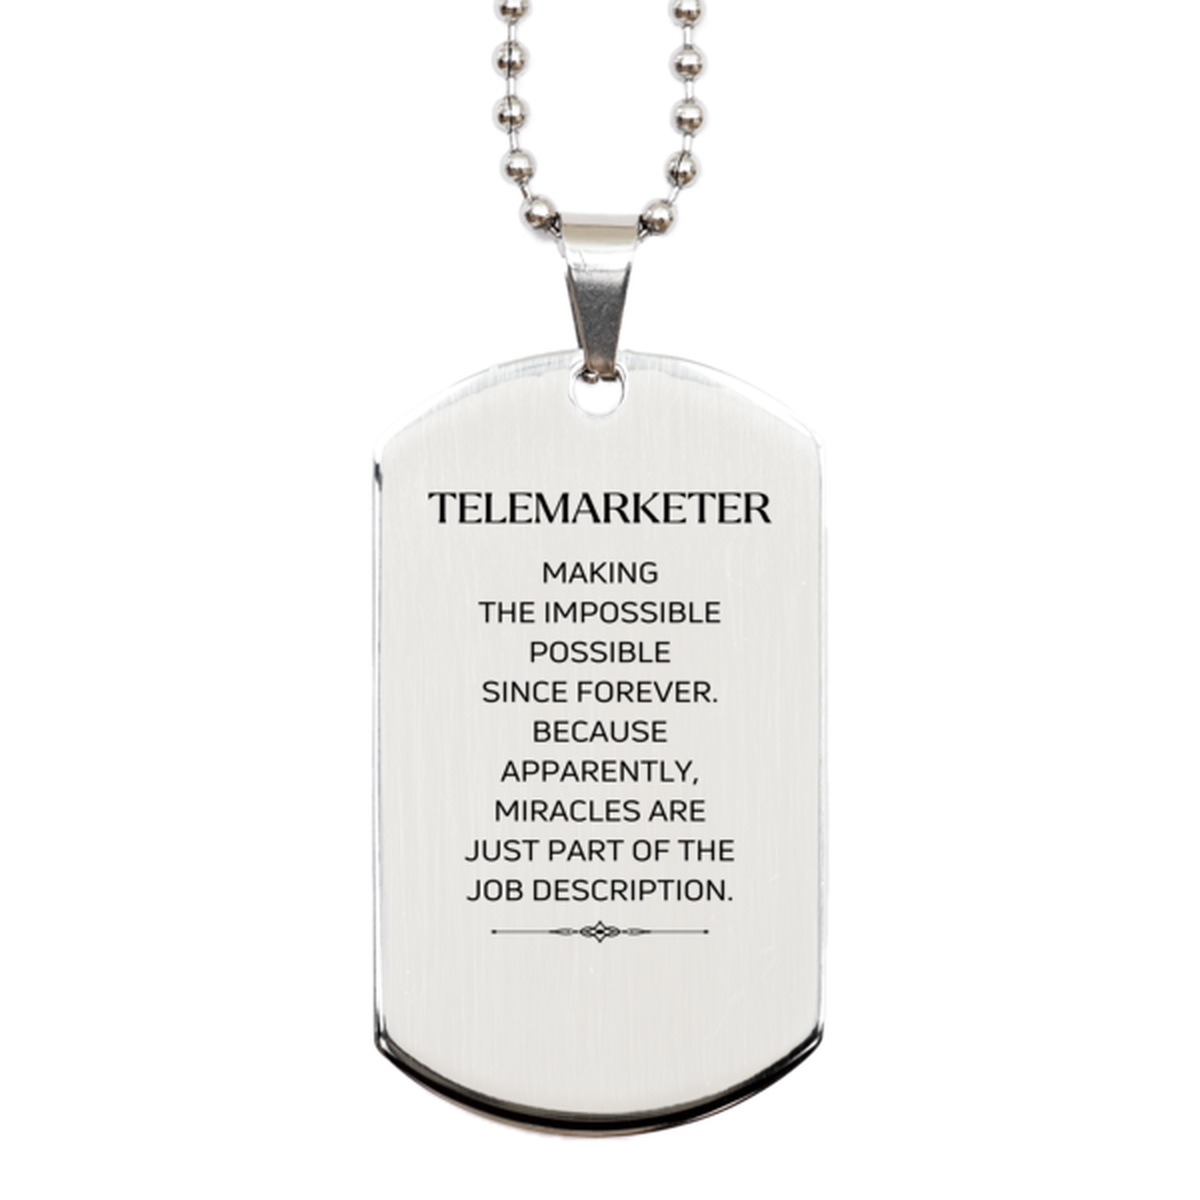 Funny Telemarketer Gifts, Miracles are just part of the job description, Inspirational Birthday Silver Dog Tag For Telemarketer, Men, Women, Coworkers, Friends, Boss